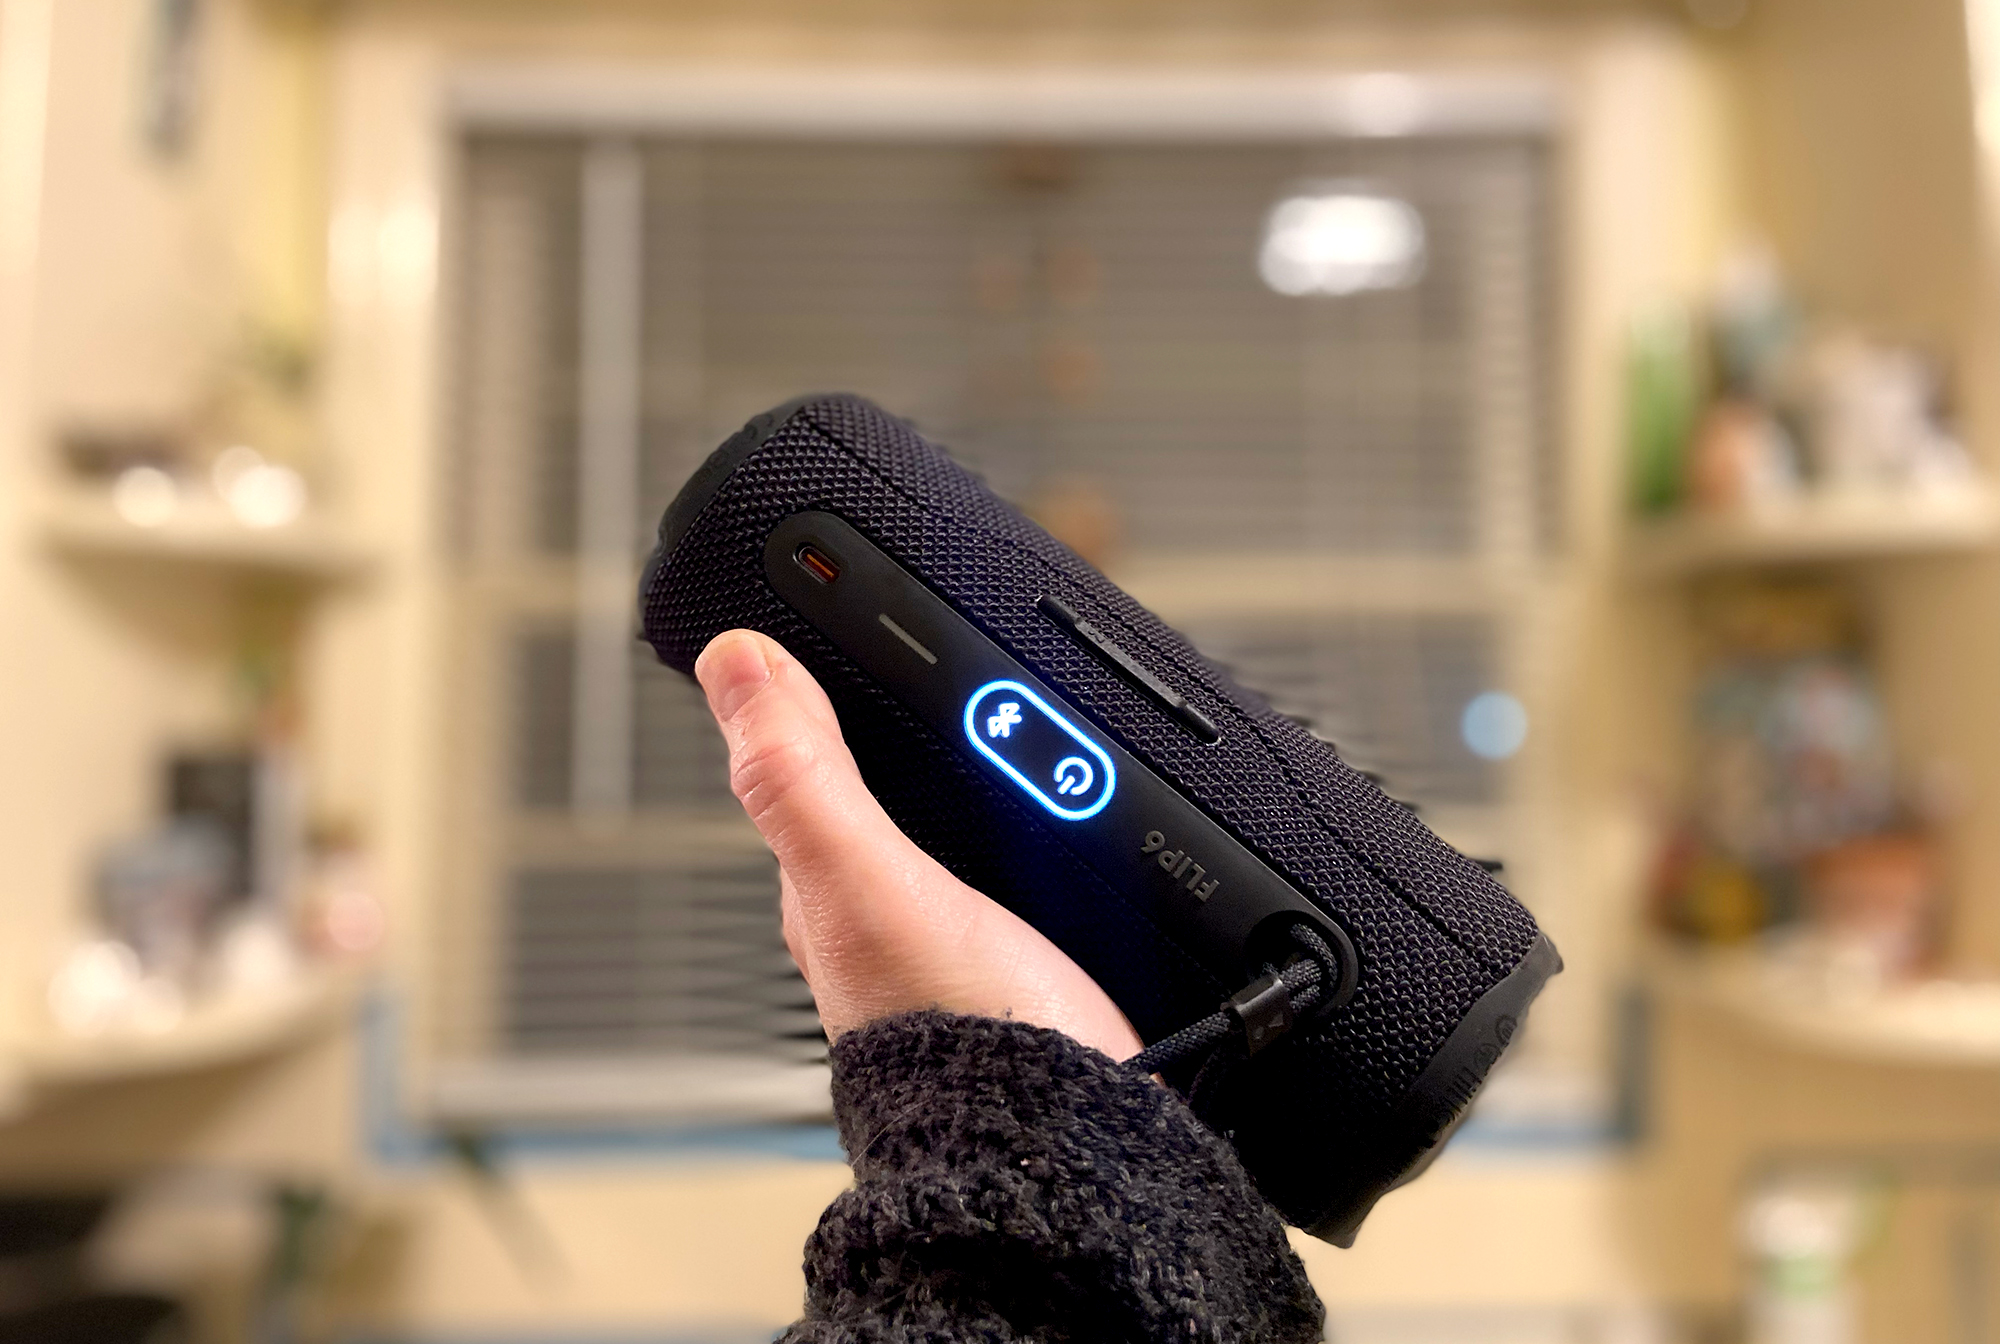 Black JBL Flip 6 Bluetooth party speaker held in the author's hand